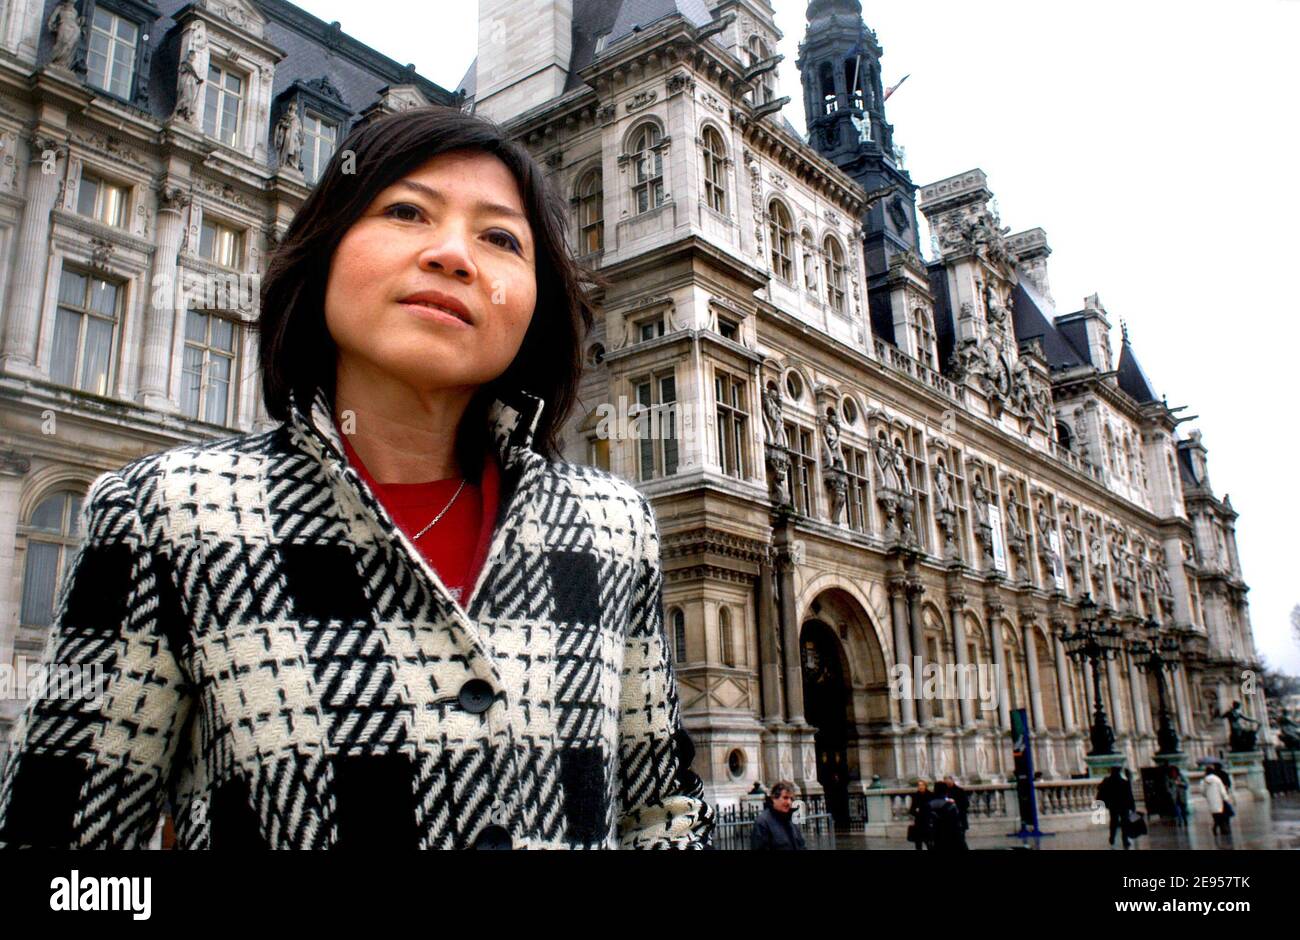 French president Jacques Chirac's adoptive daughter Anh Dao poses in front of Hotel de Ville in Paris, France on december 20, 2004. Anh Dao lived there with the Chirac family when Jacques Chirac was Paris mayor in the seventies. Photo by Alastair Miller/ABACA. Stock Photo